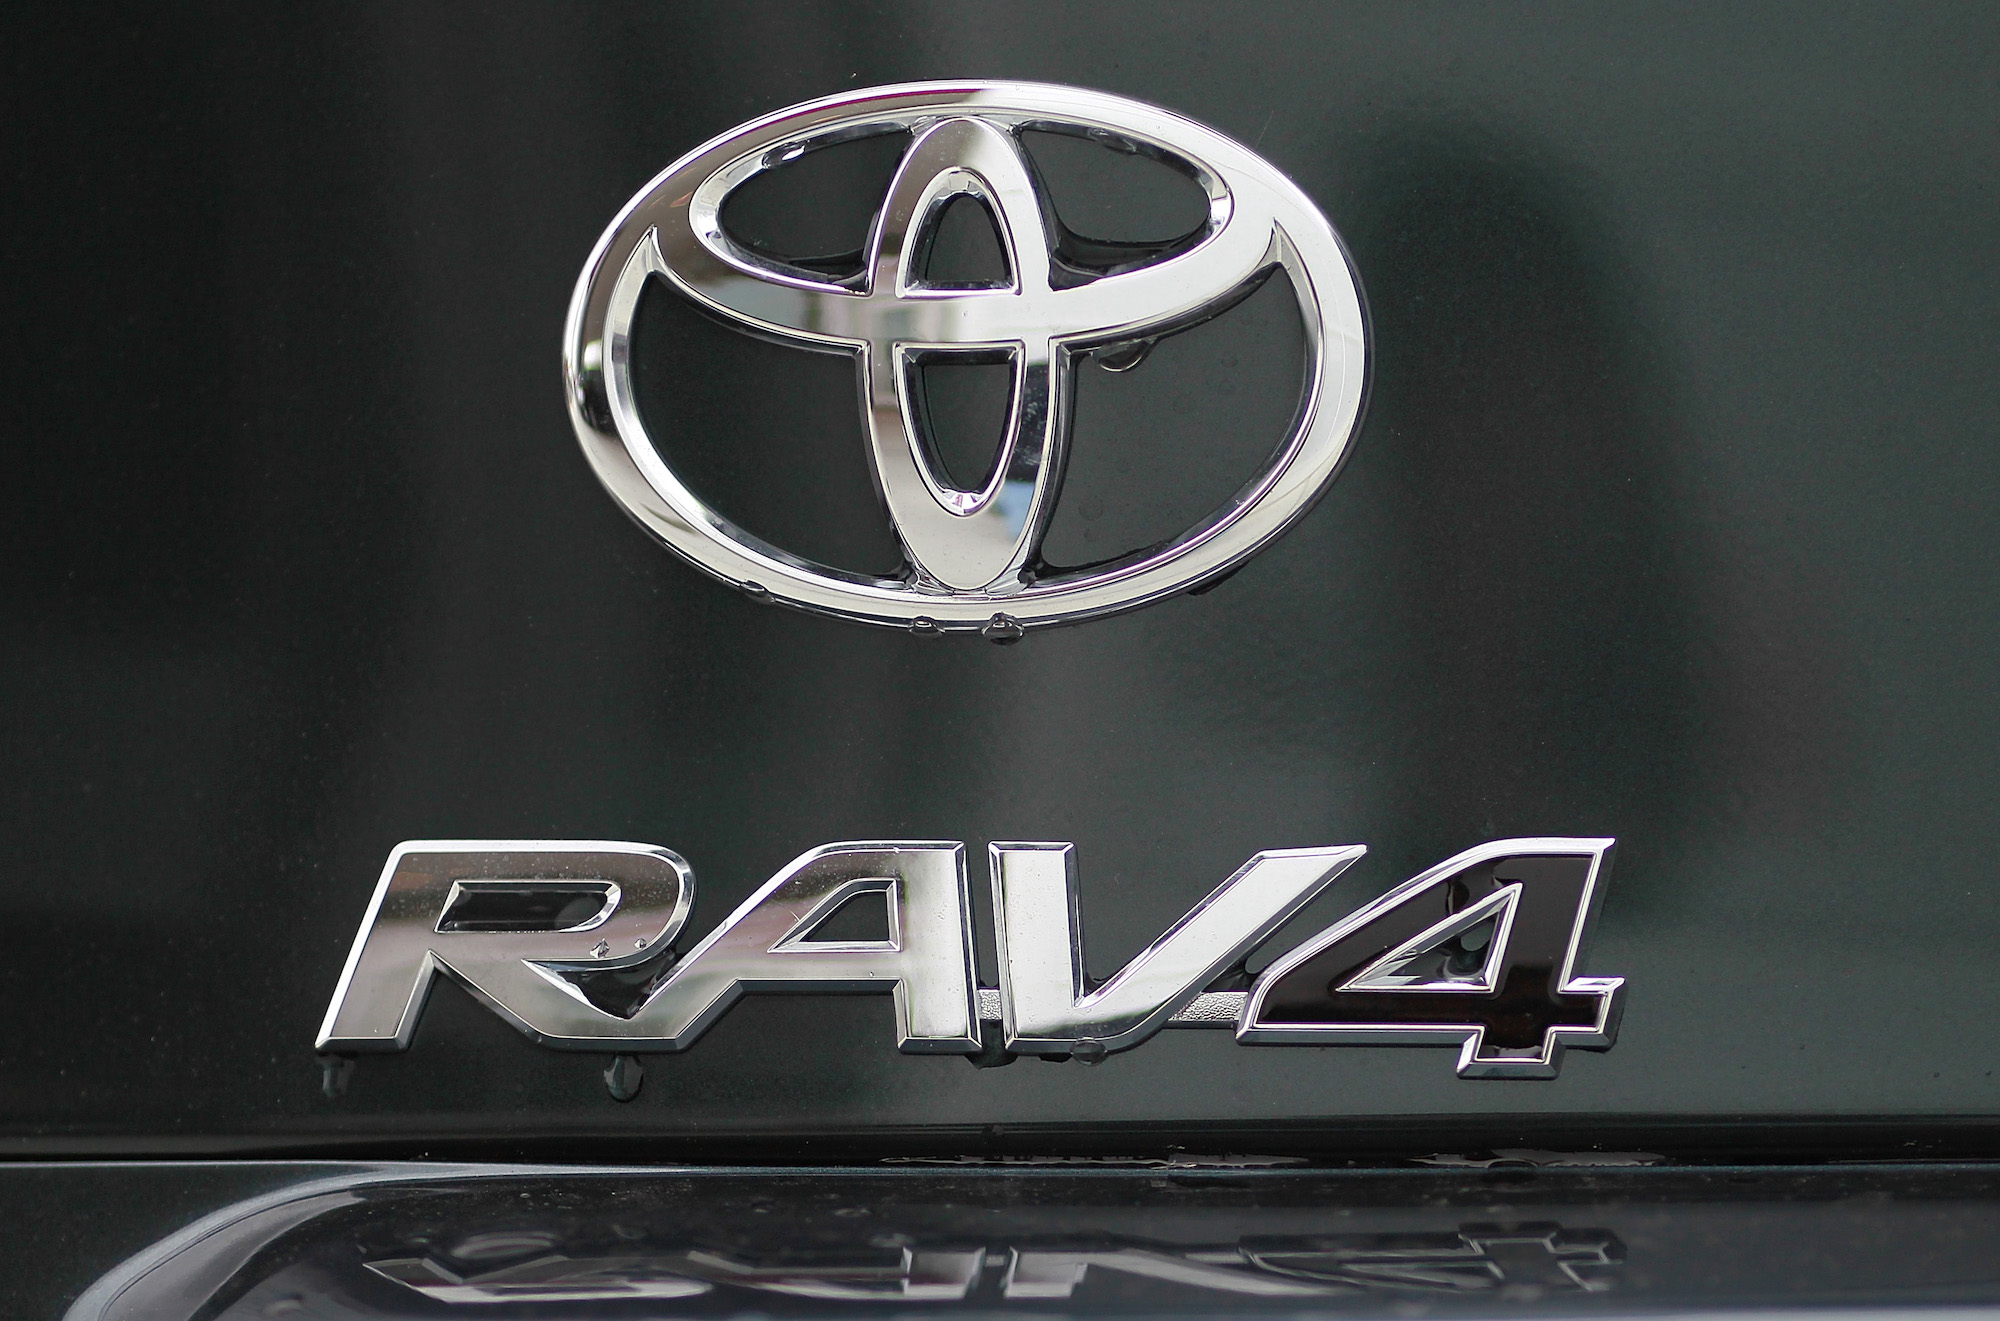 The Toyota and RAV4 logos displayed on the back of a Toyota RAV4 at a dealership in Oakland, California, in 2011